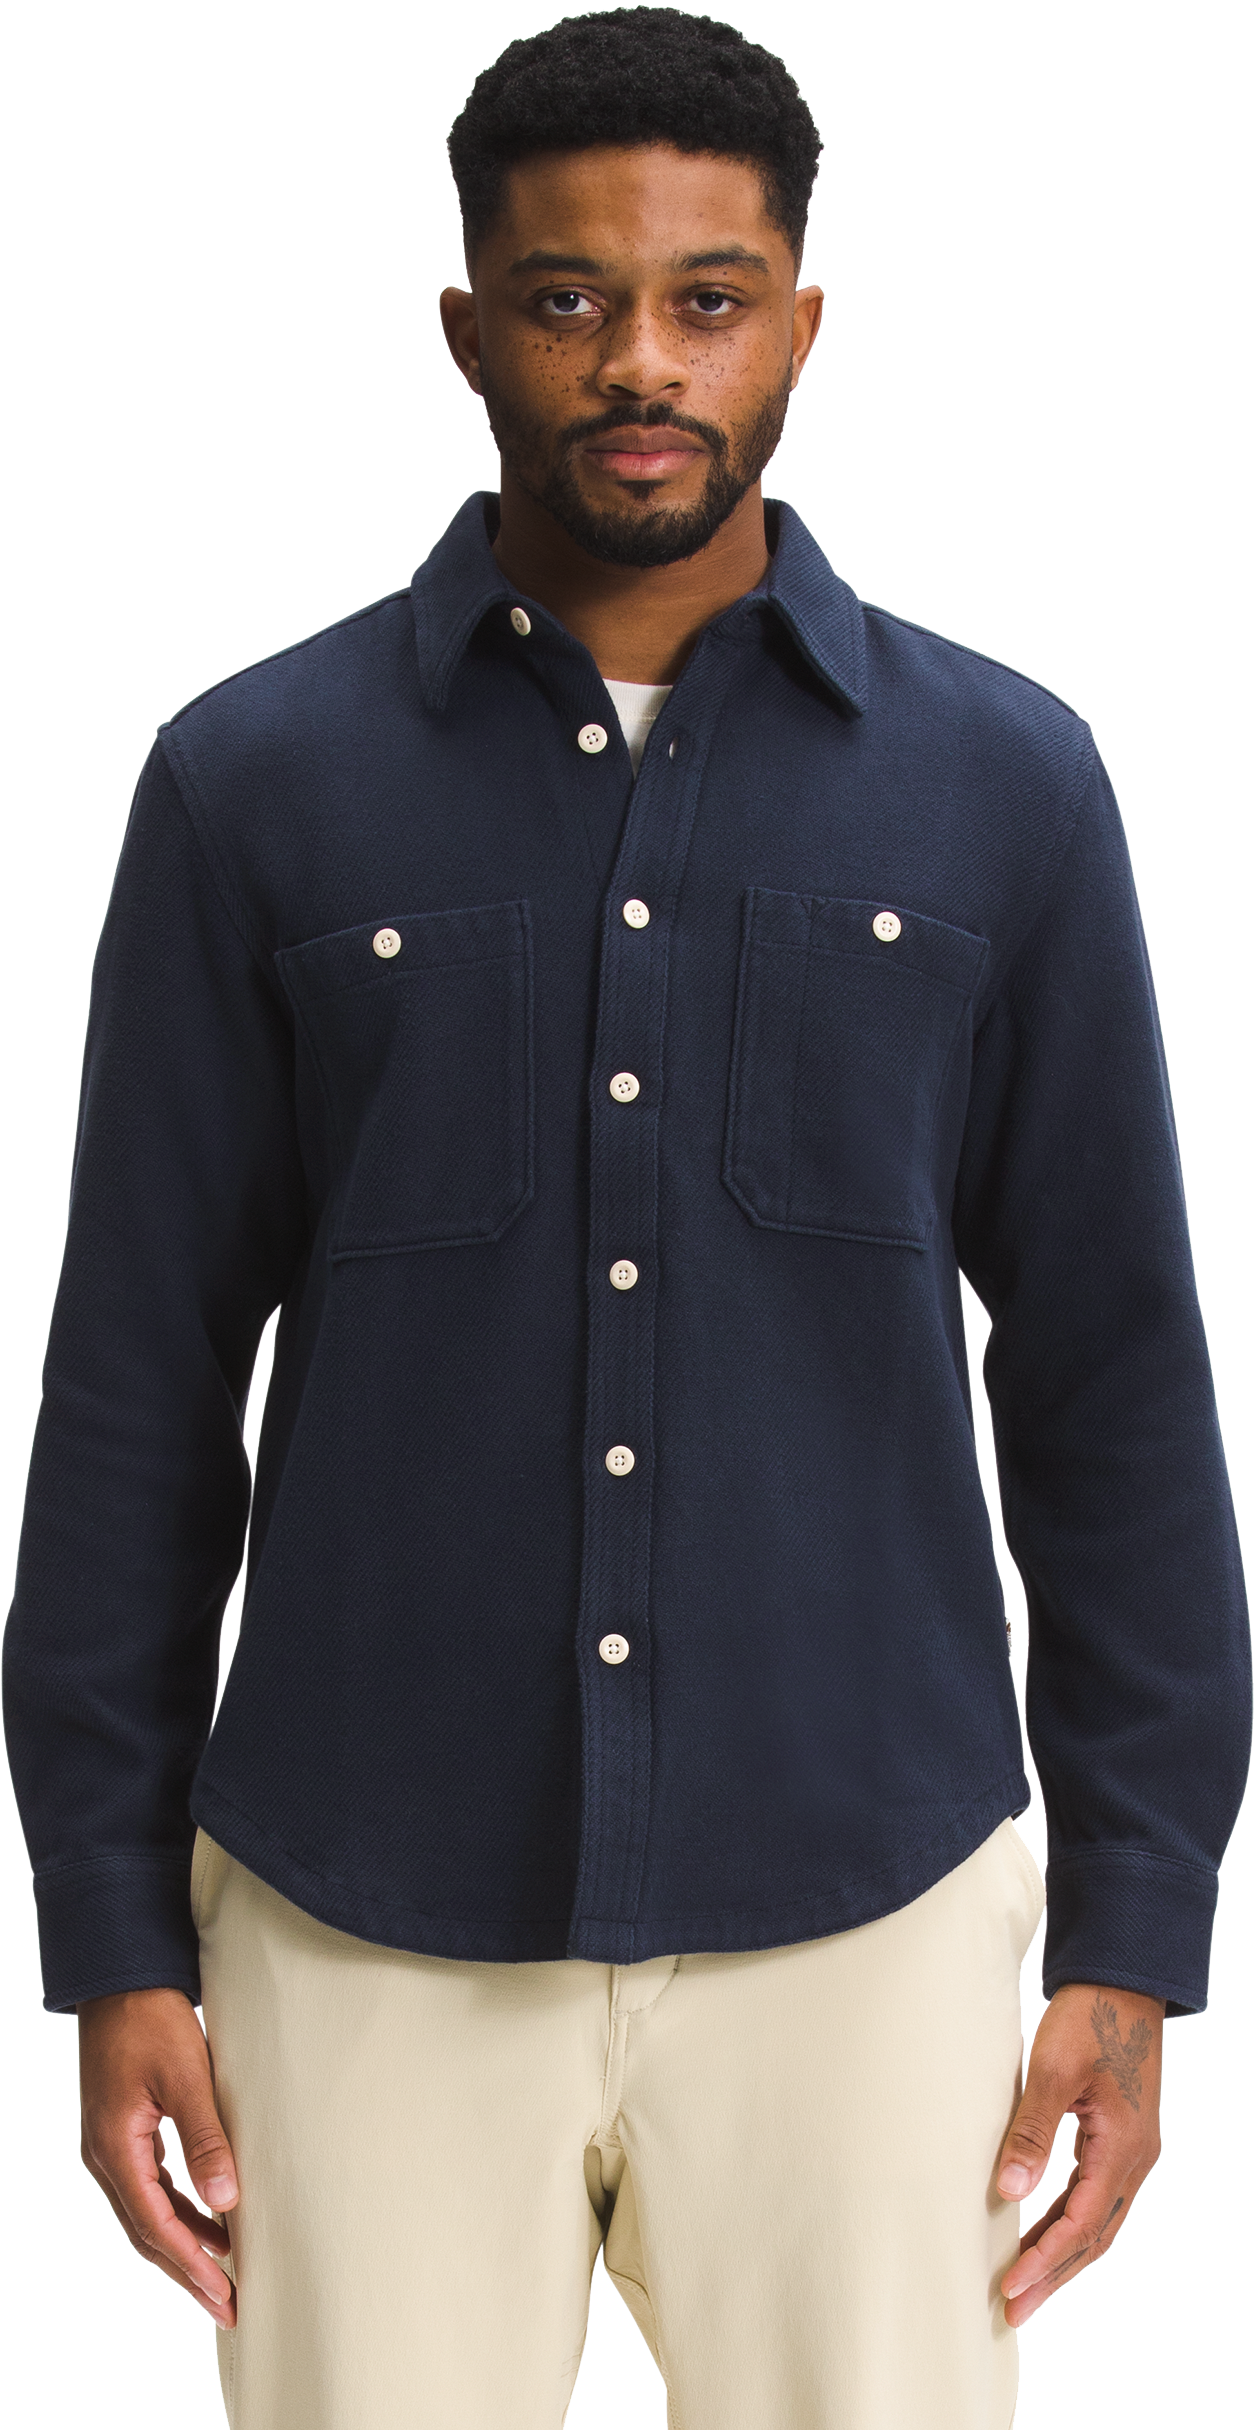 The North Face Valley Twill Flannel Long-Sleeve Shirt for Men - Aviator Navy - M